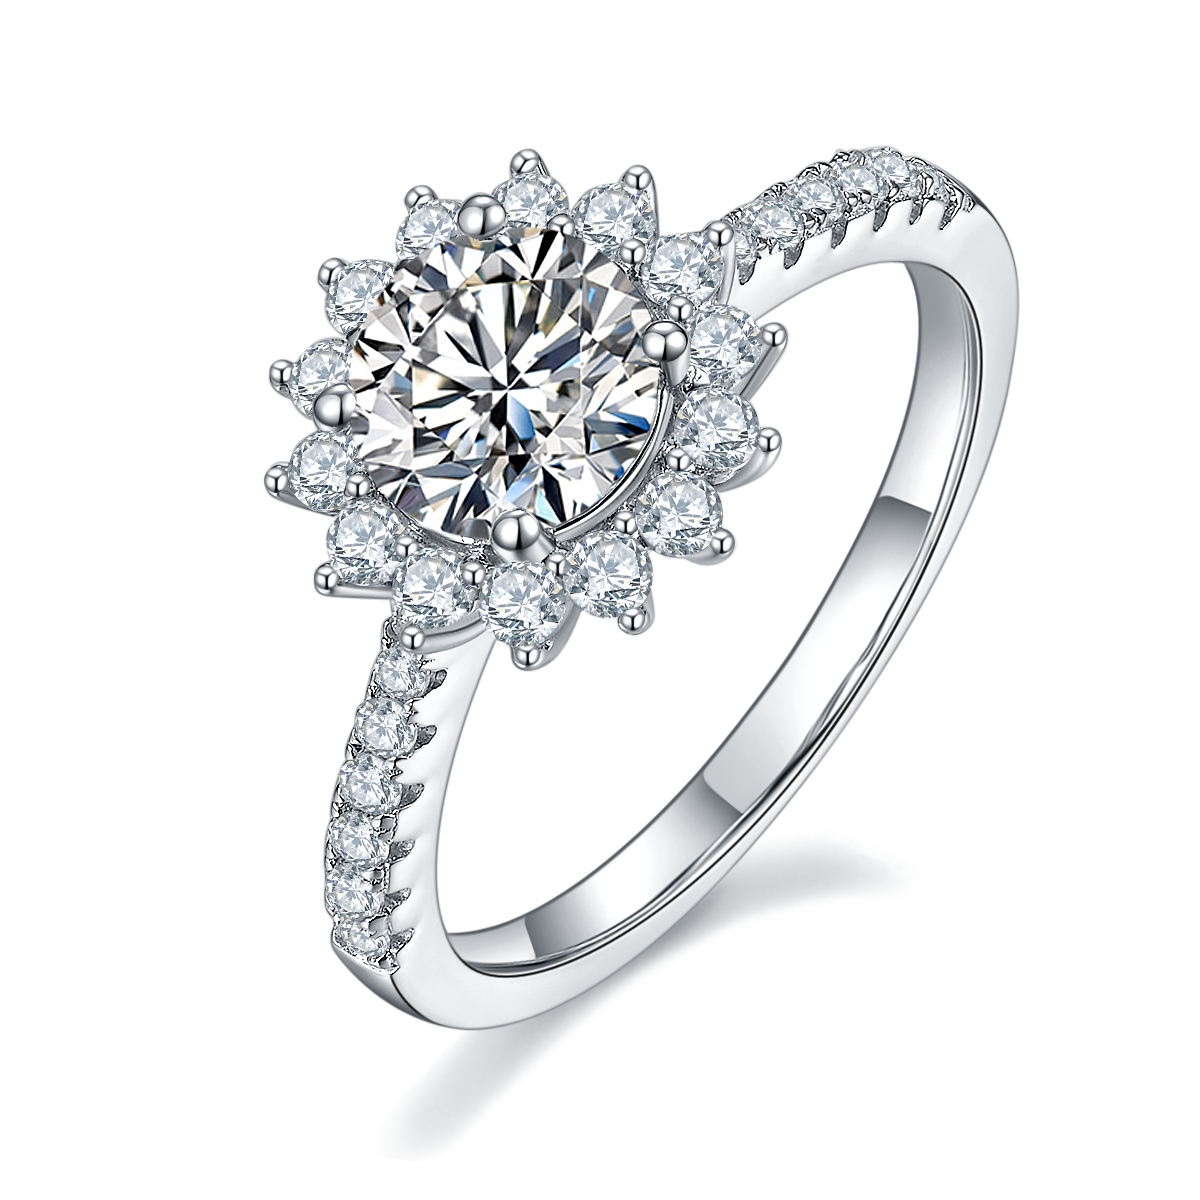 DEDEJILL Sunflower Sterling Silver Plated White Gold Round Cut Moissanite Halo Ring-1ct D Grade